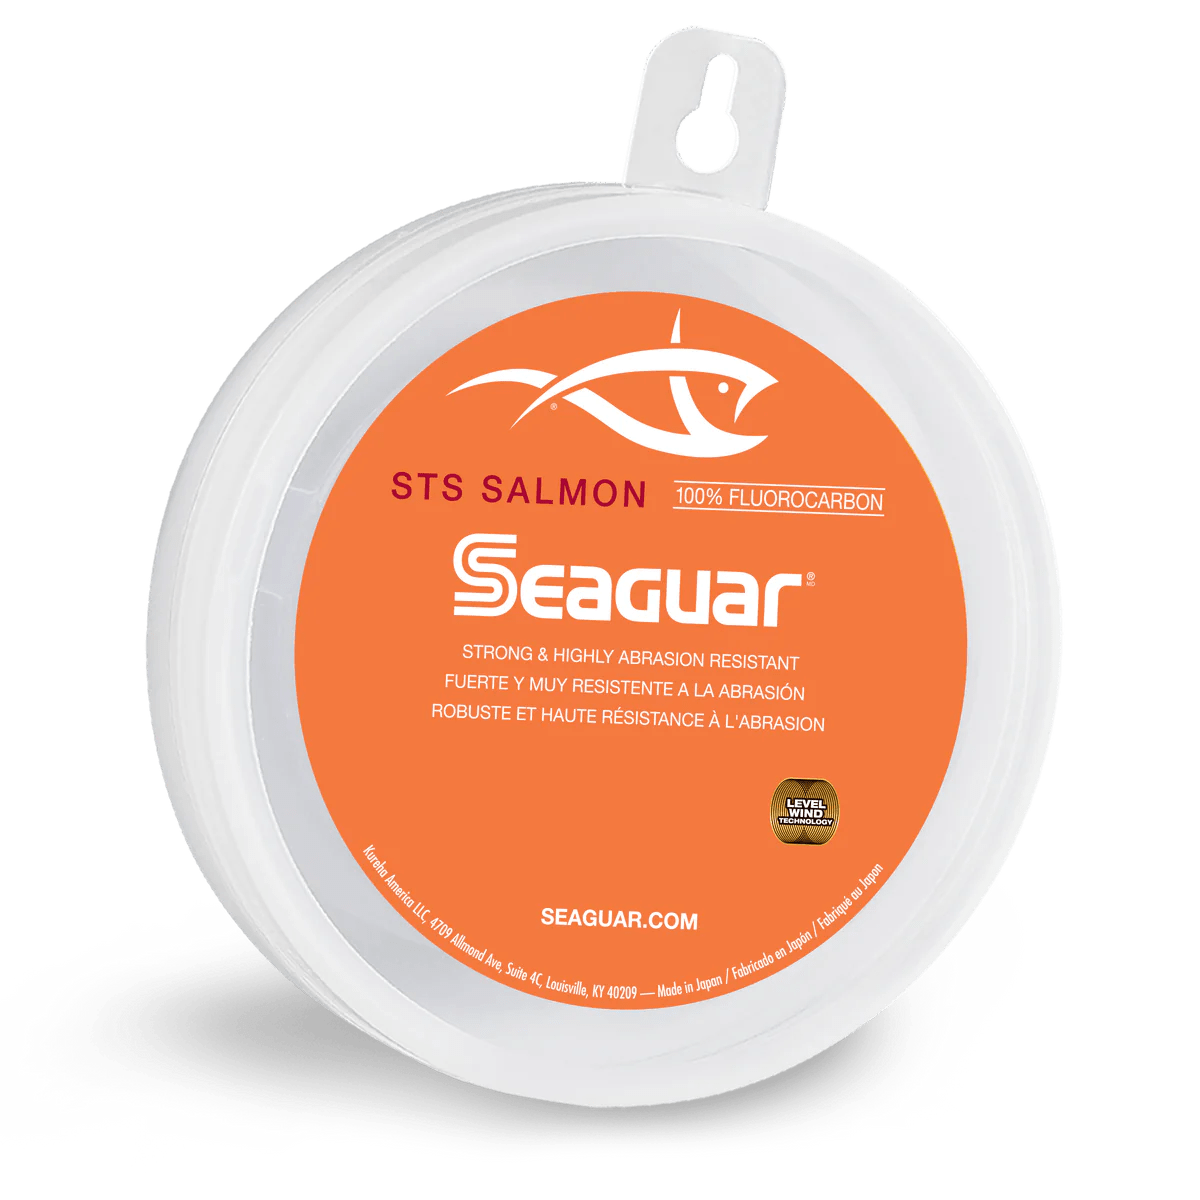 Seaguar Gold Label Fluorocarbon Line 25 Yard Leader Material Pick Any Pound  Test